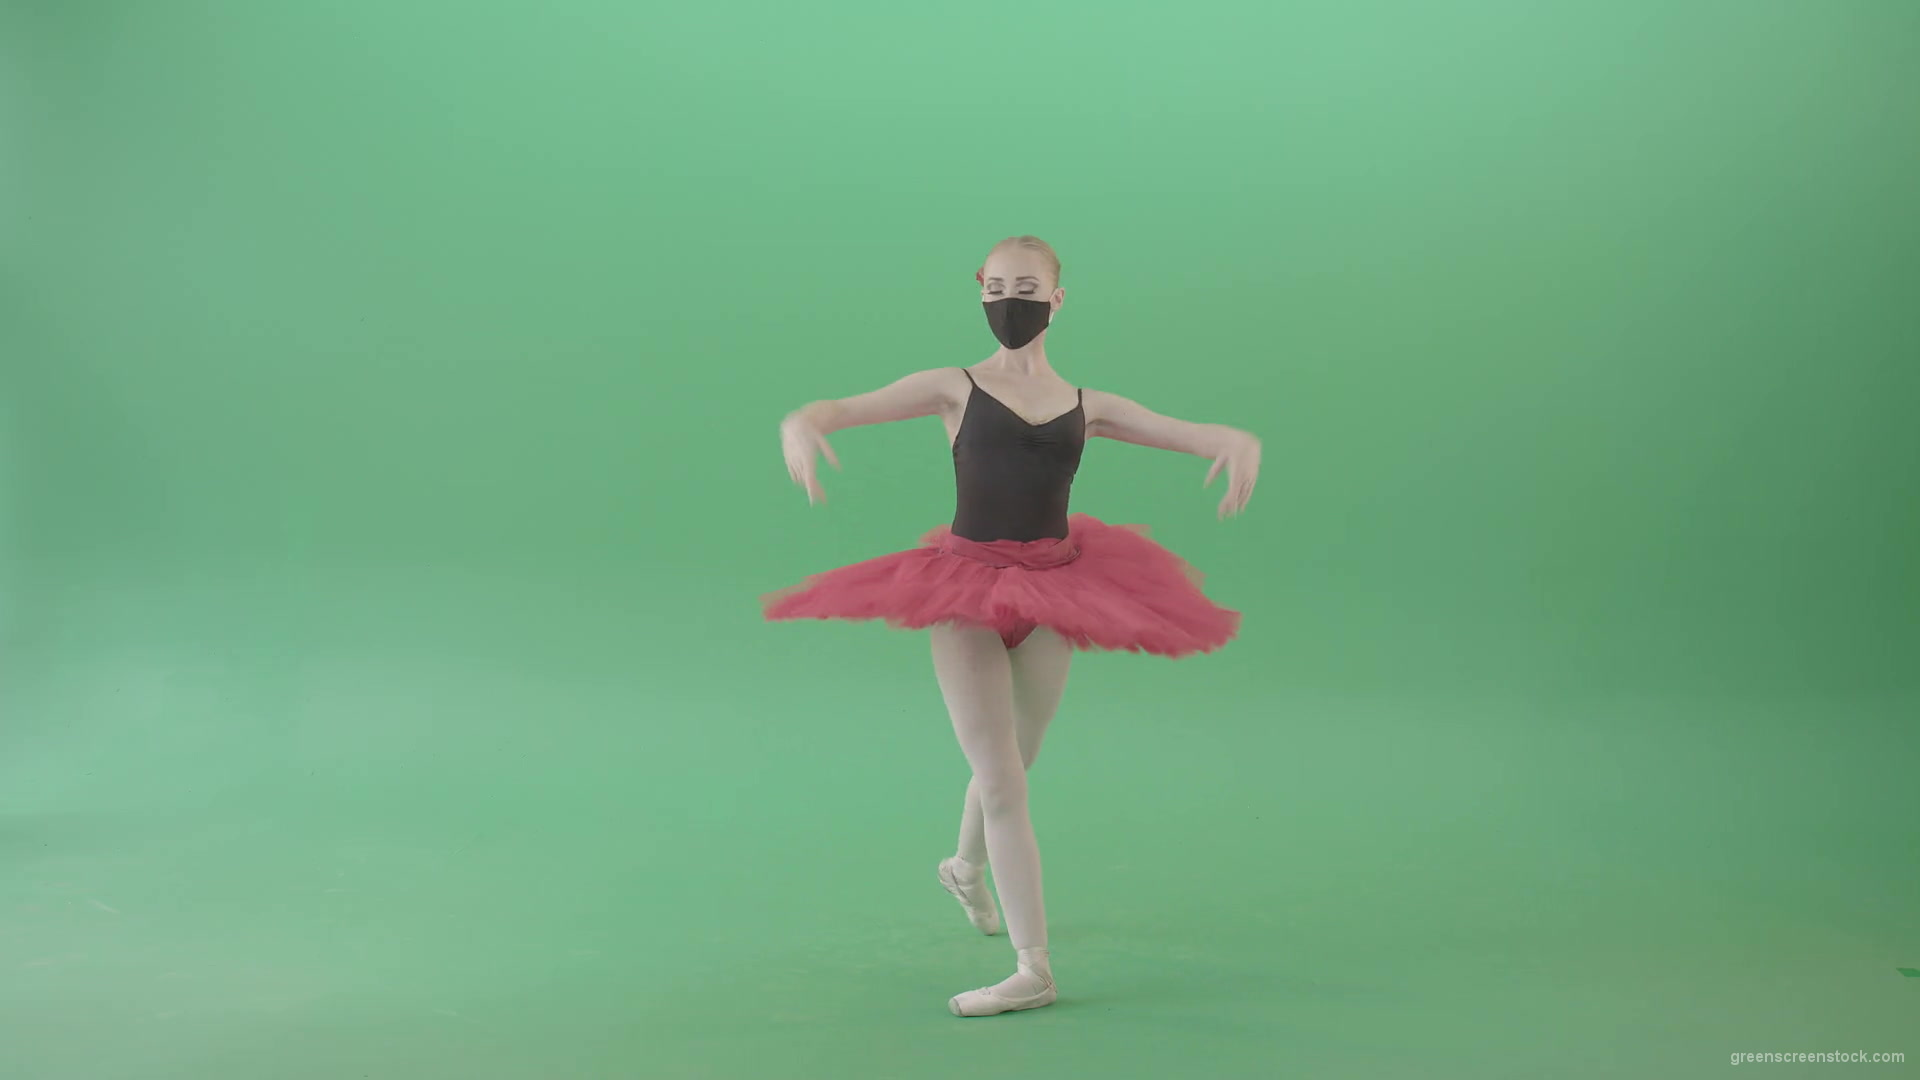 Tinny-Ballet-Dancing-Girl-Ballerina-in-red-black-dress-and-mask-welcome-people-for-awards-Green-Screen-Video-Footage-1920_006 Green Screen Stock